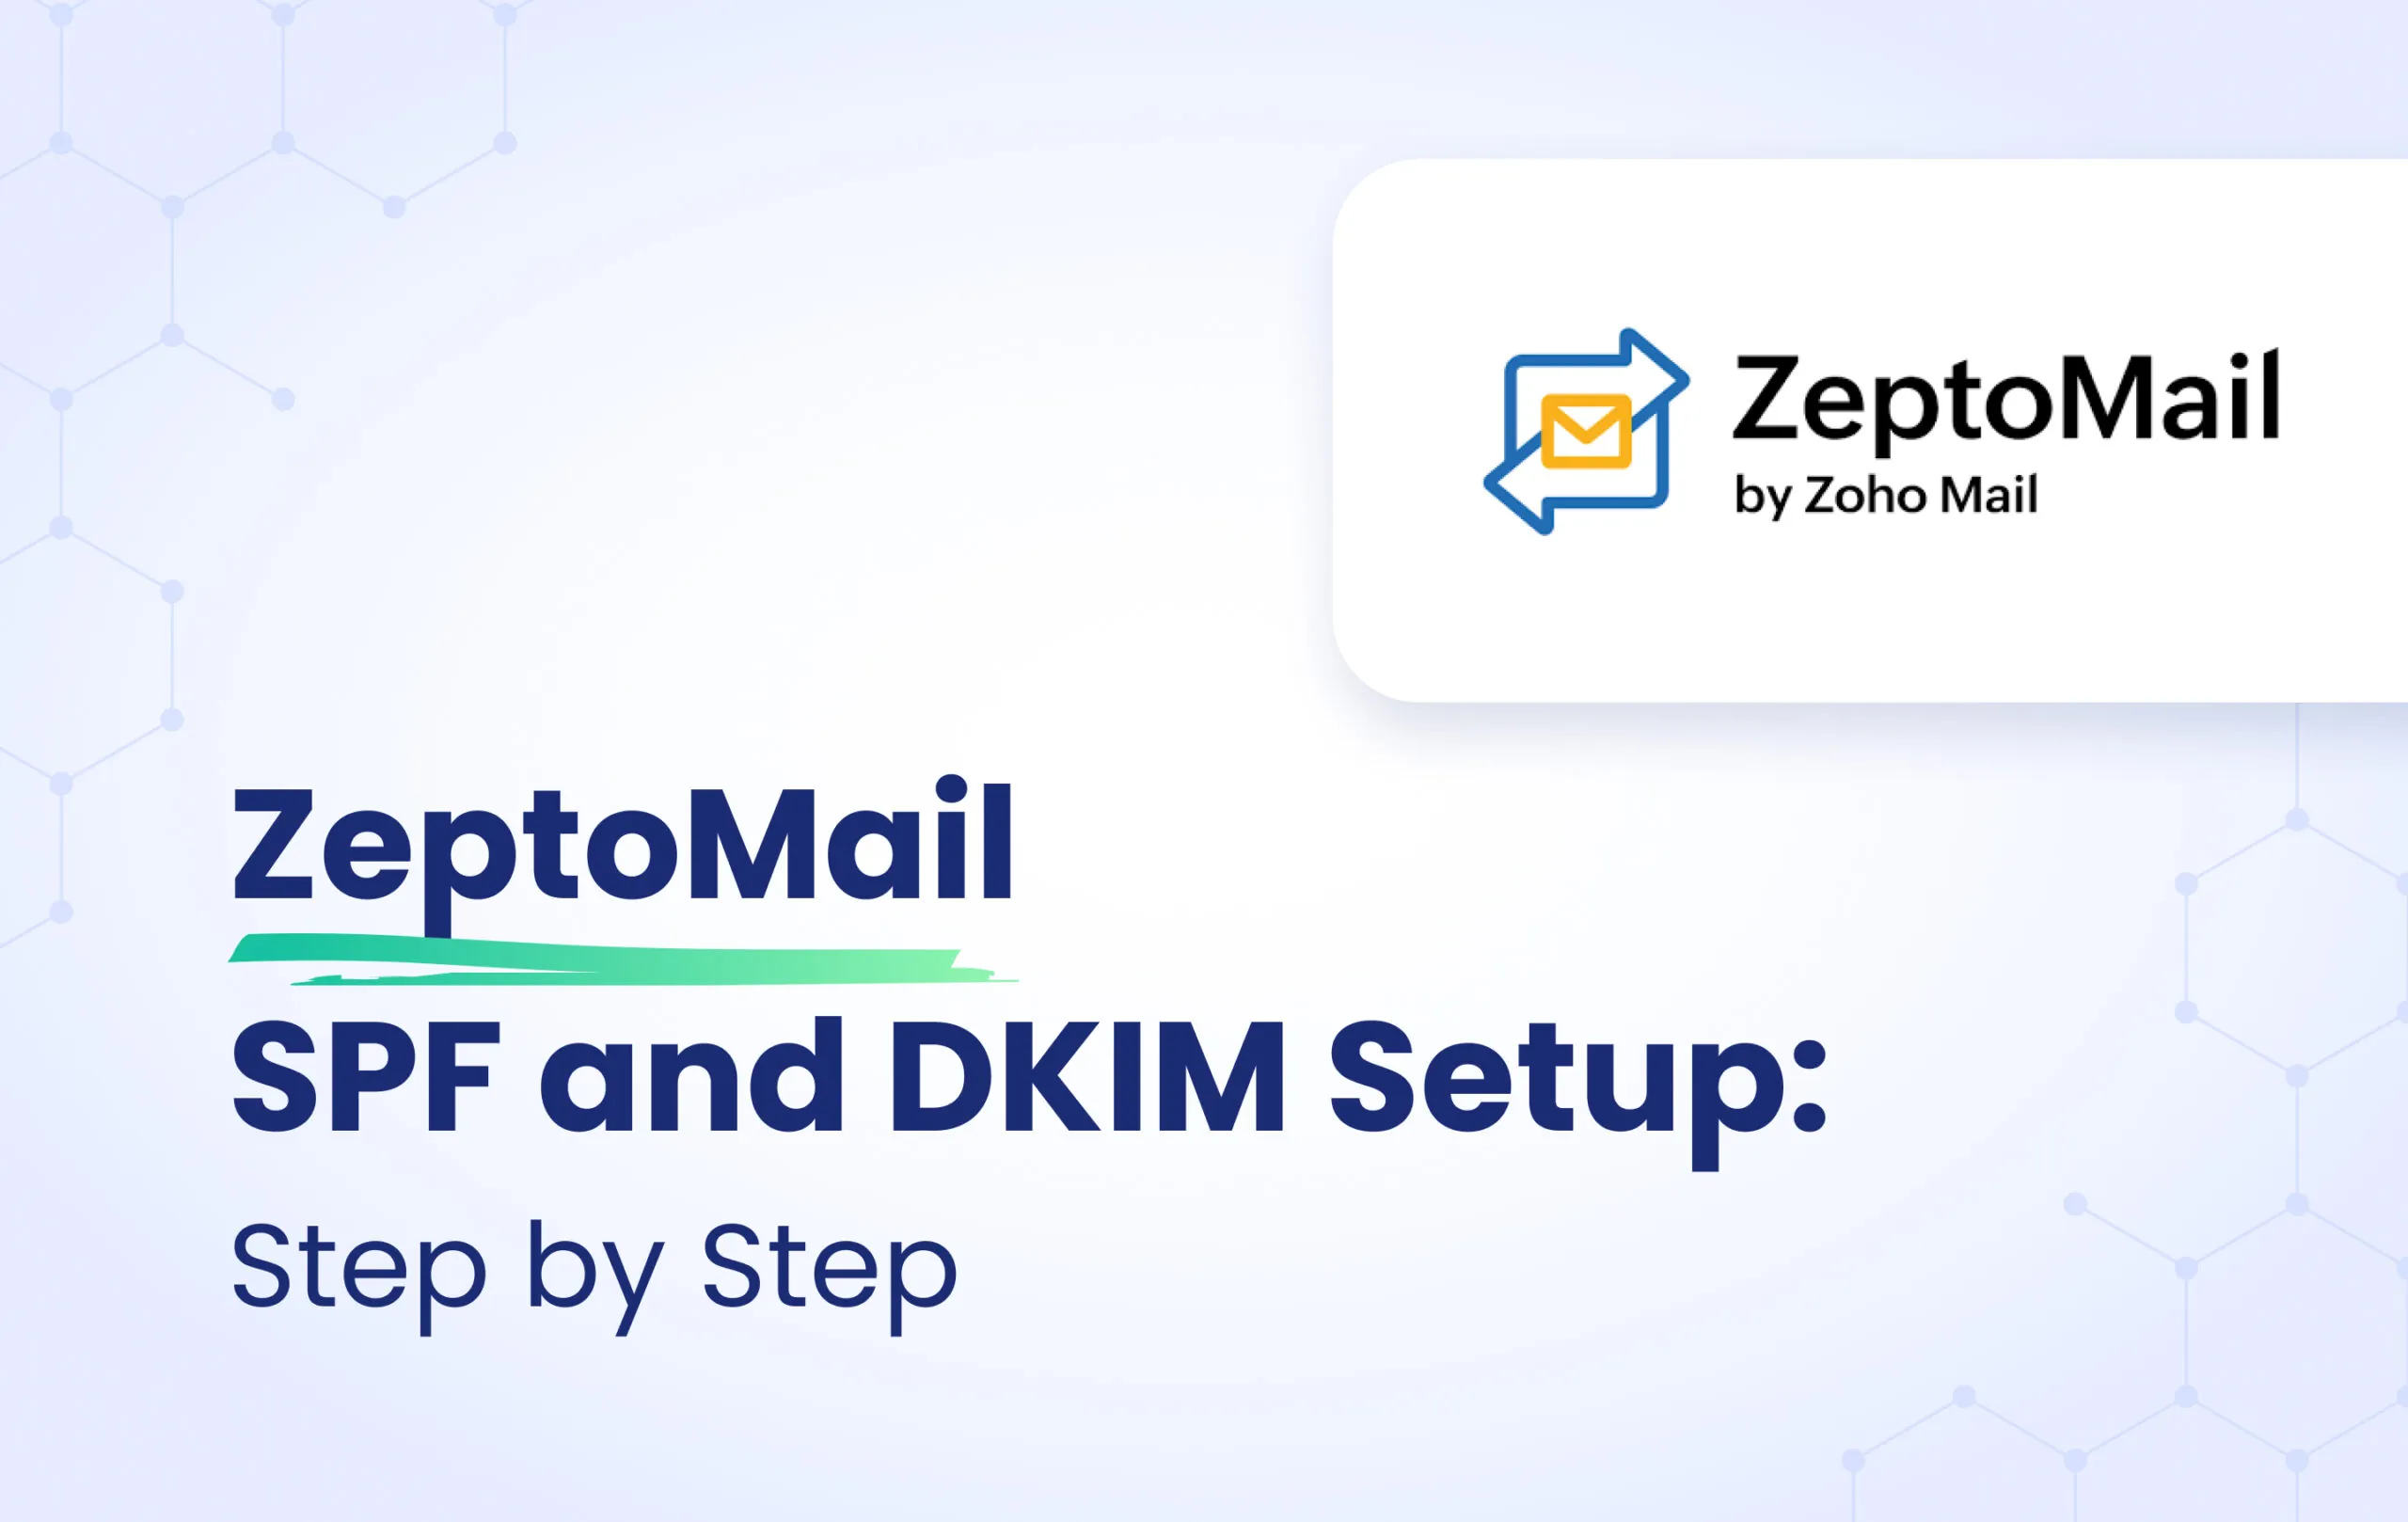 ZeptoMail SPF and DKIM Setup: Step-by-Step featured image